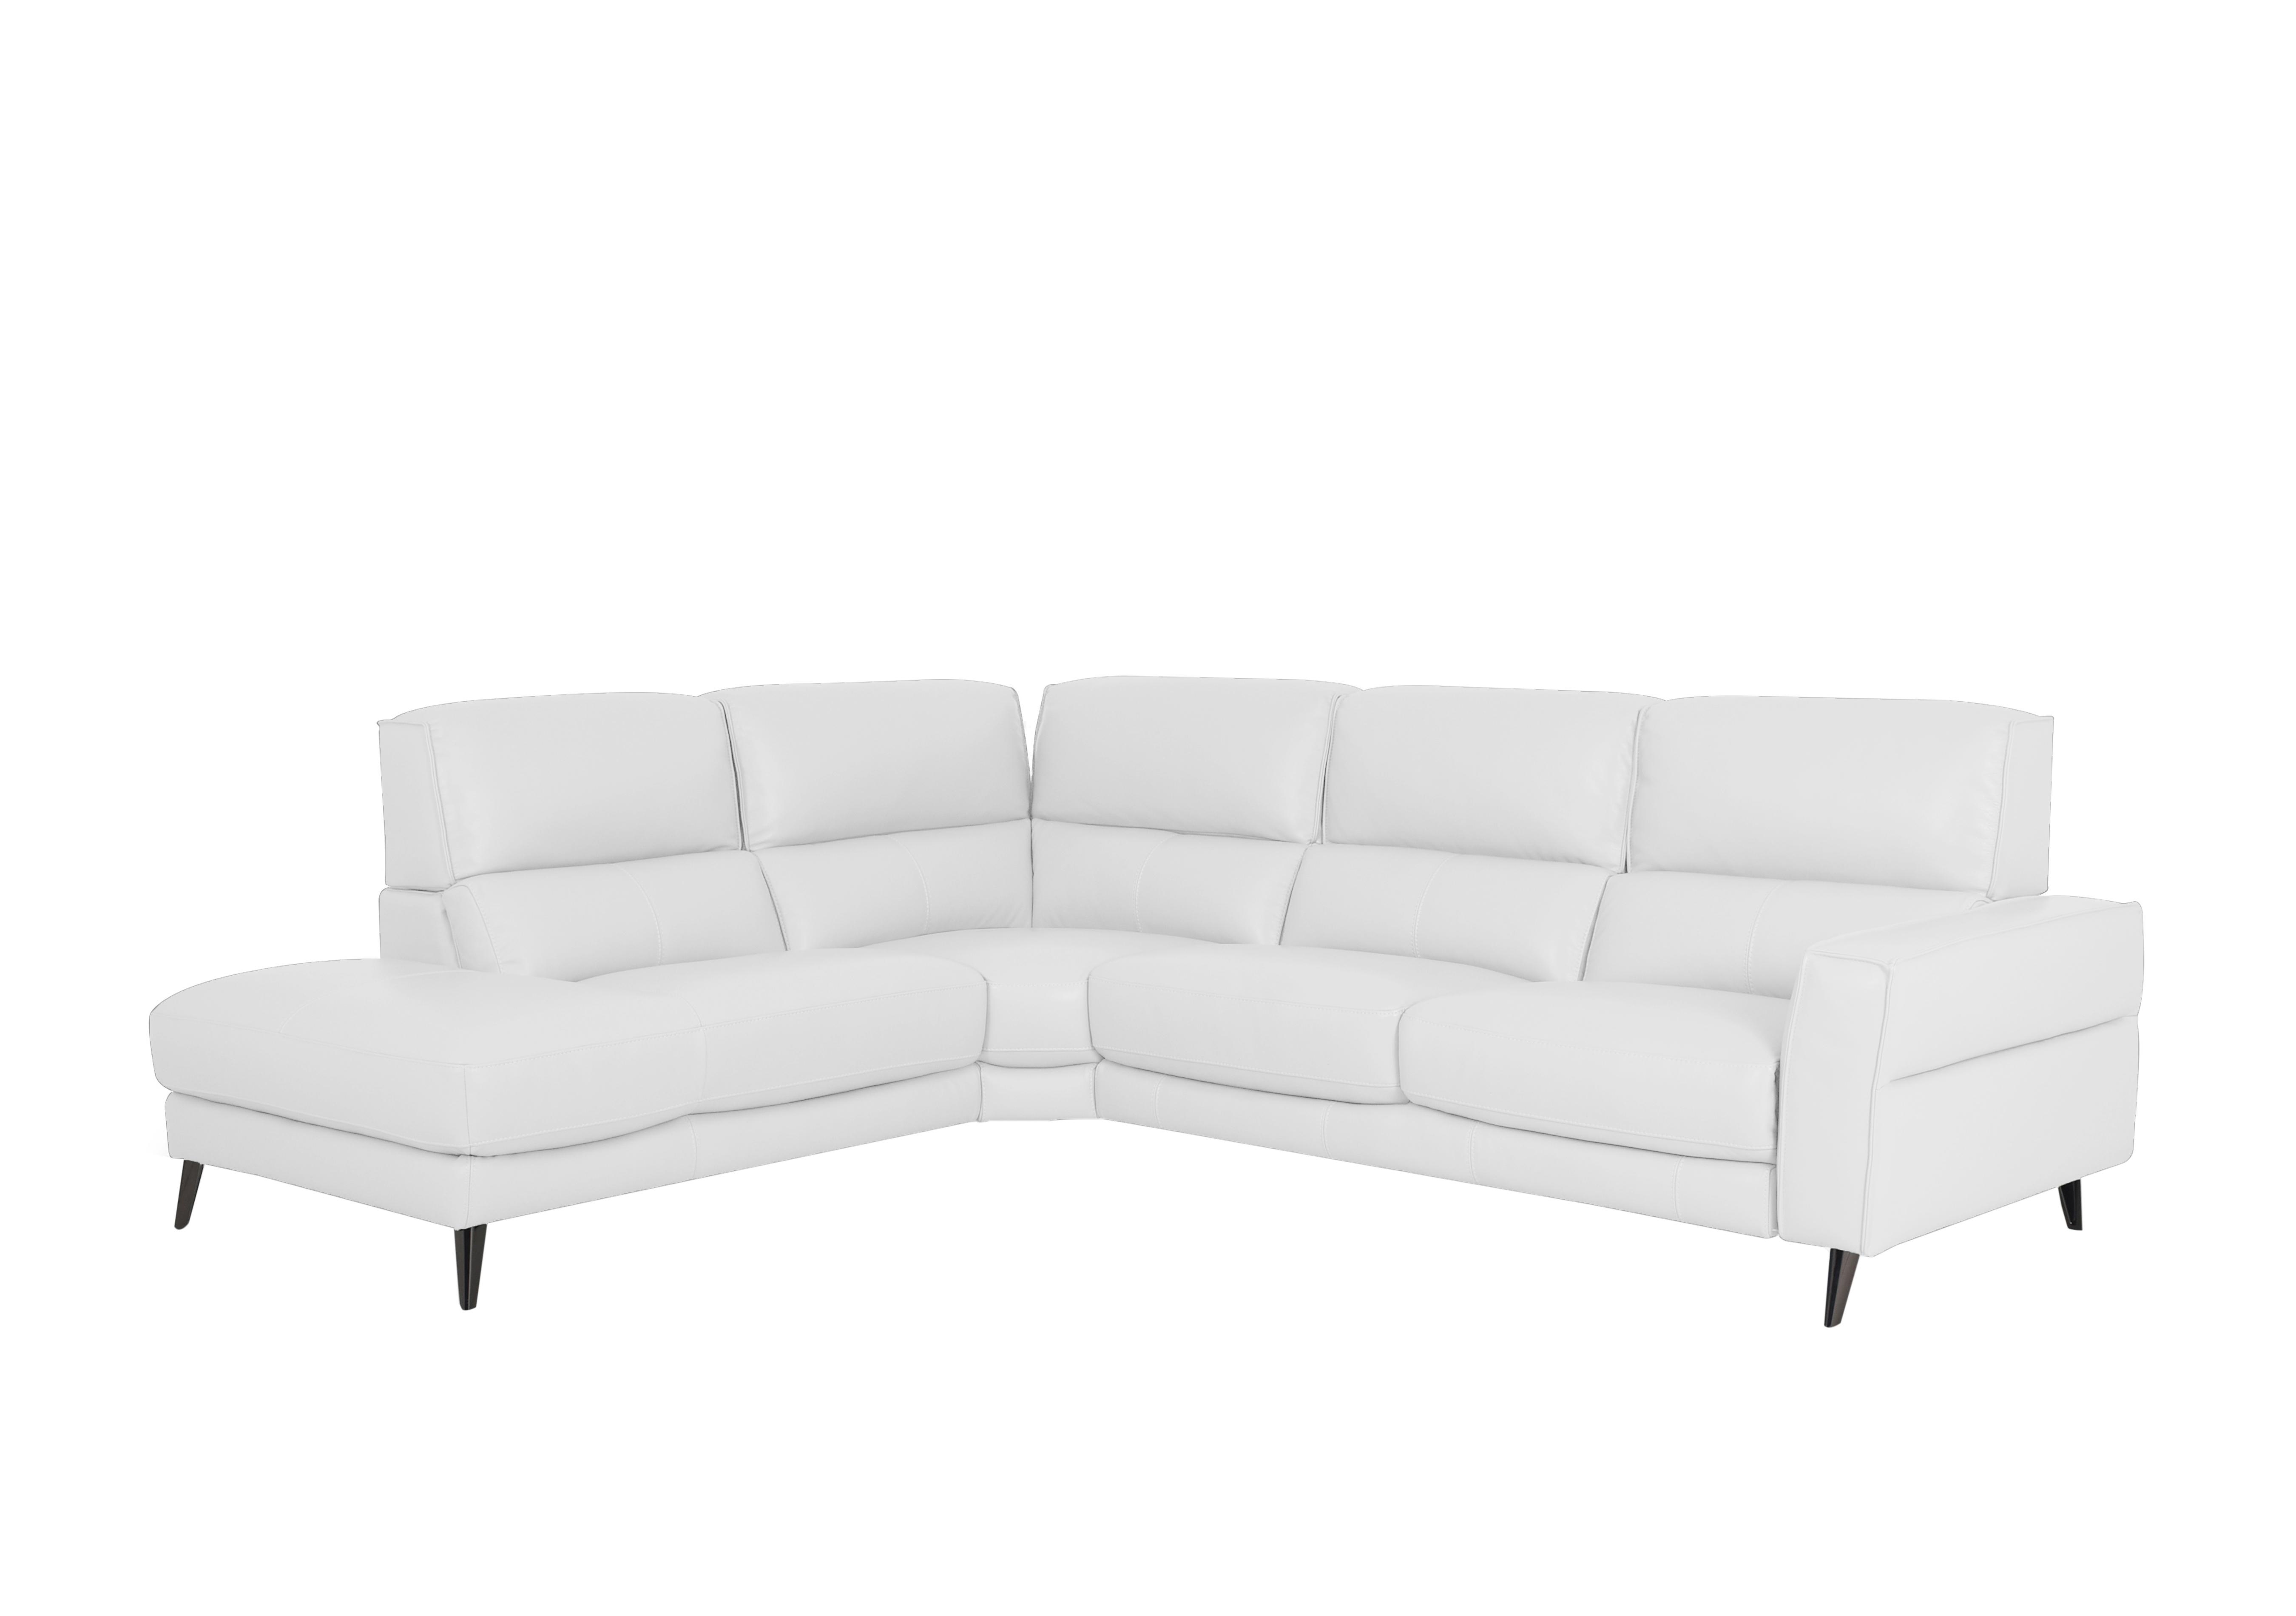 Axel Leather Chaise End Sofa in Bv-744d Star White on Furniture Village